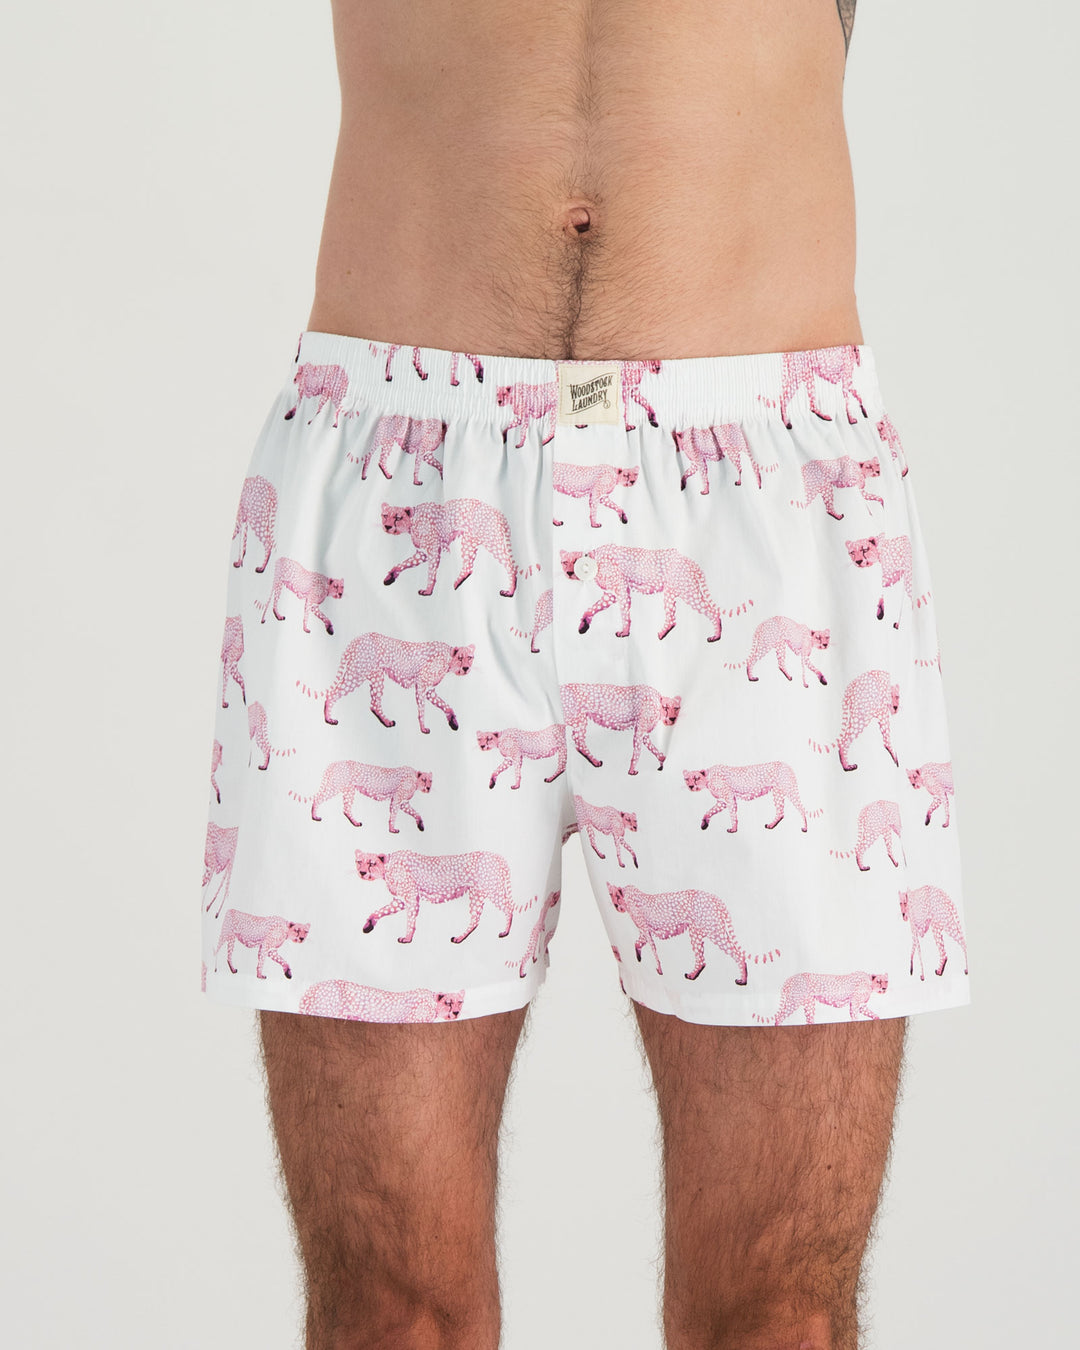 Mens Boxers Pink Cheetahs Front - Woodstock Laundry